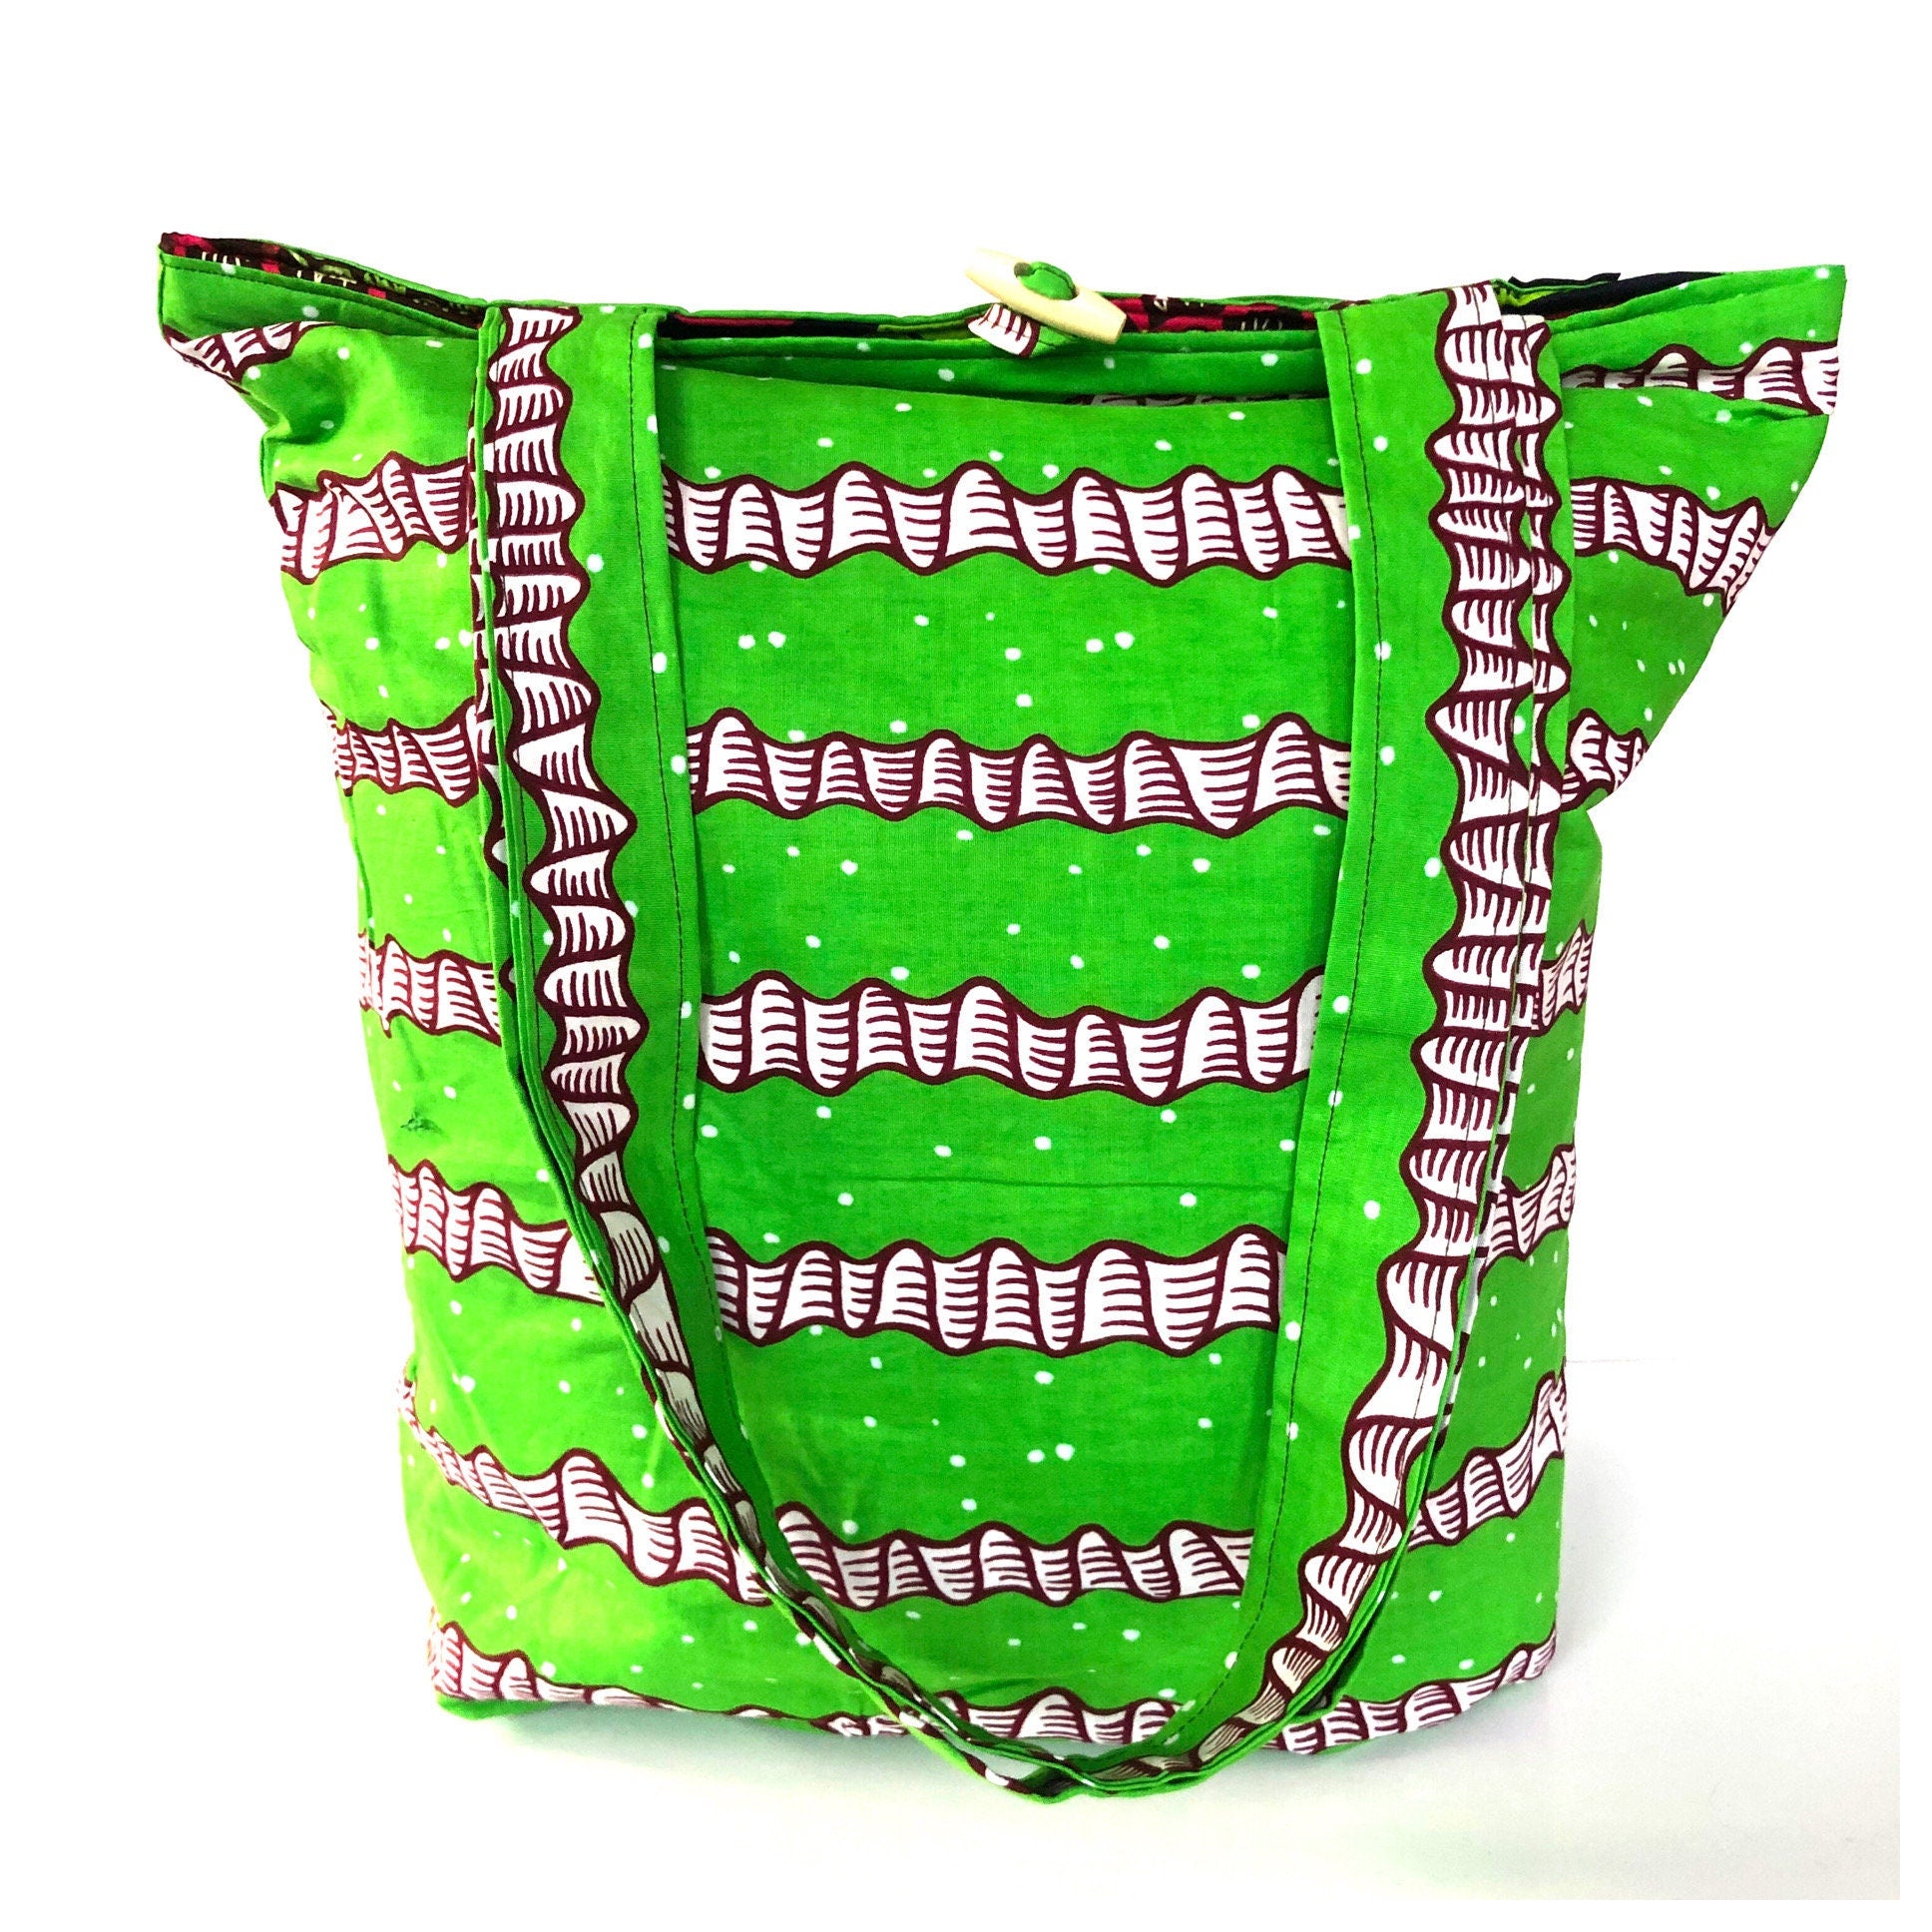 PIEH Big Patchwork African  fabric quilted tote Bag - Green